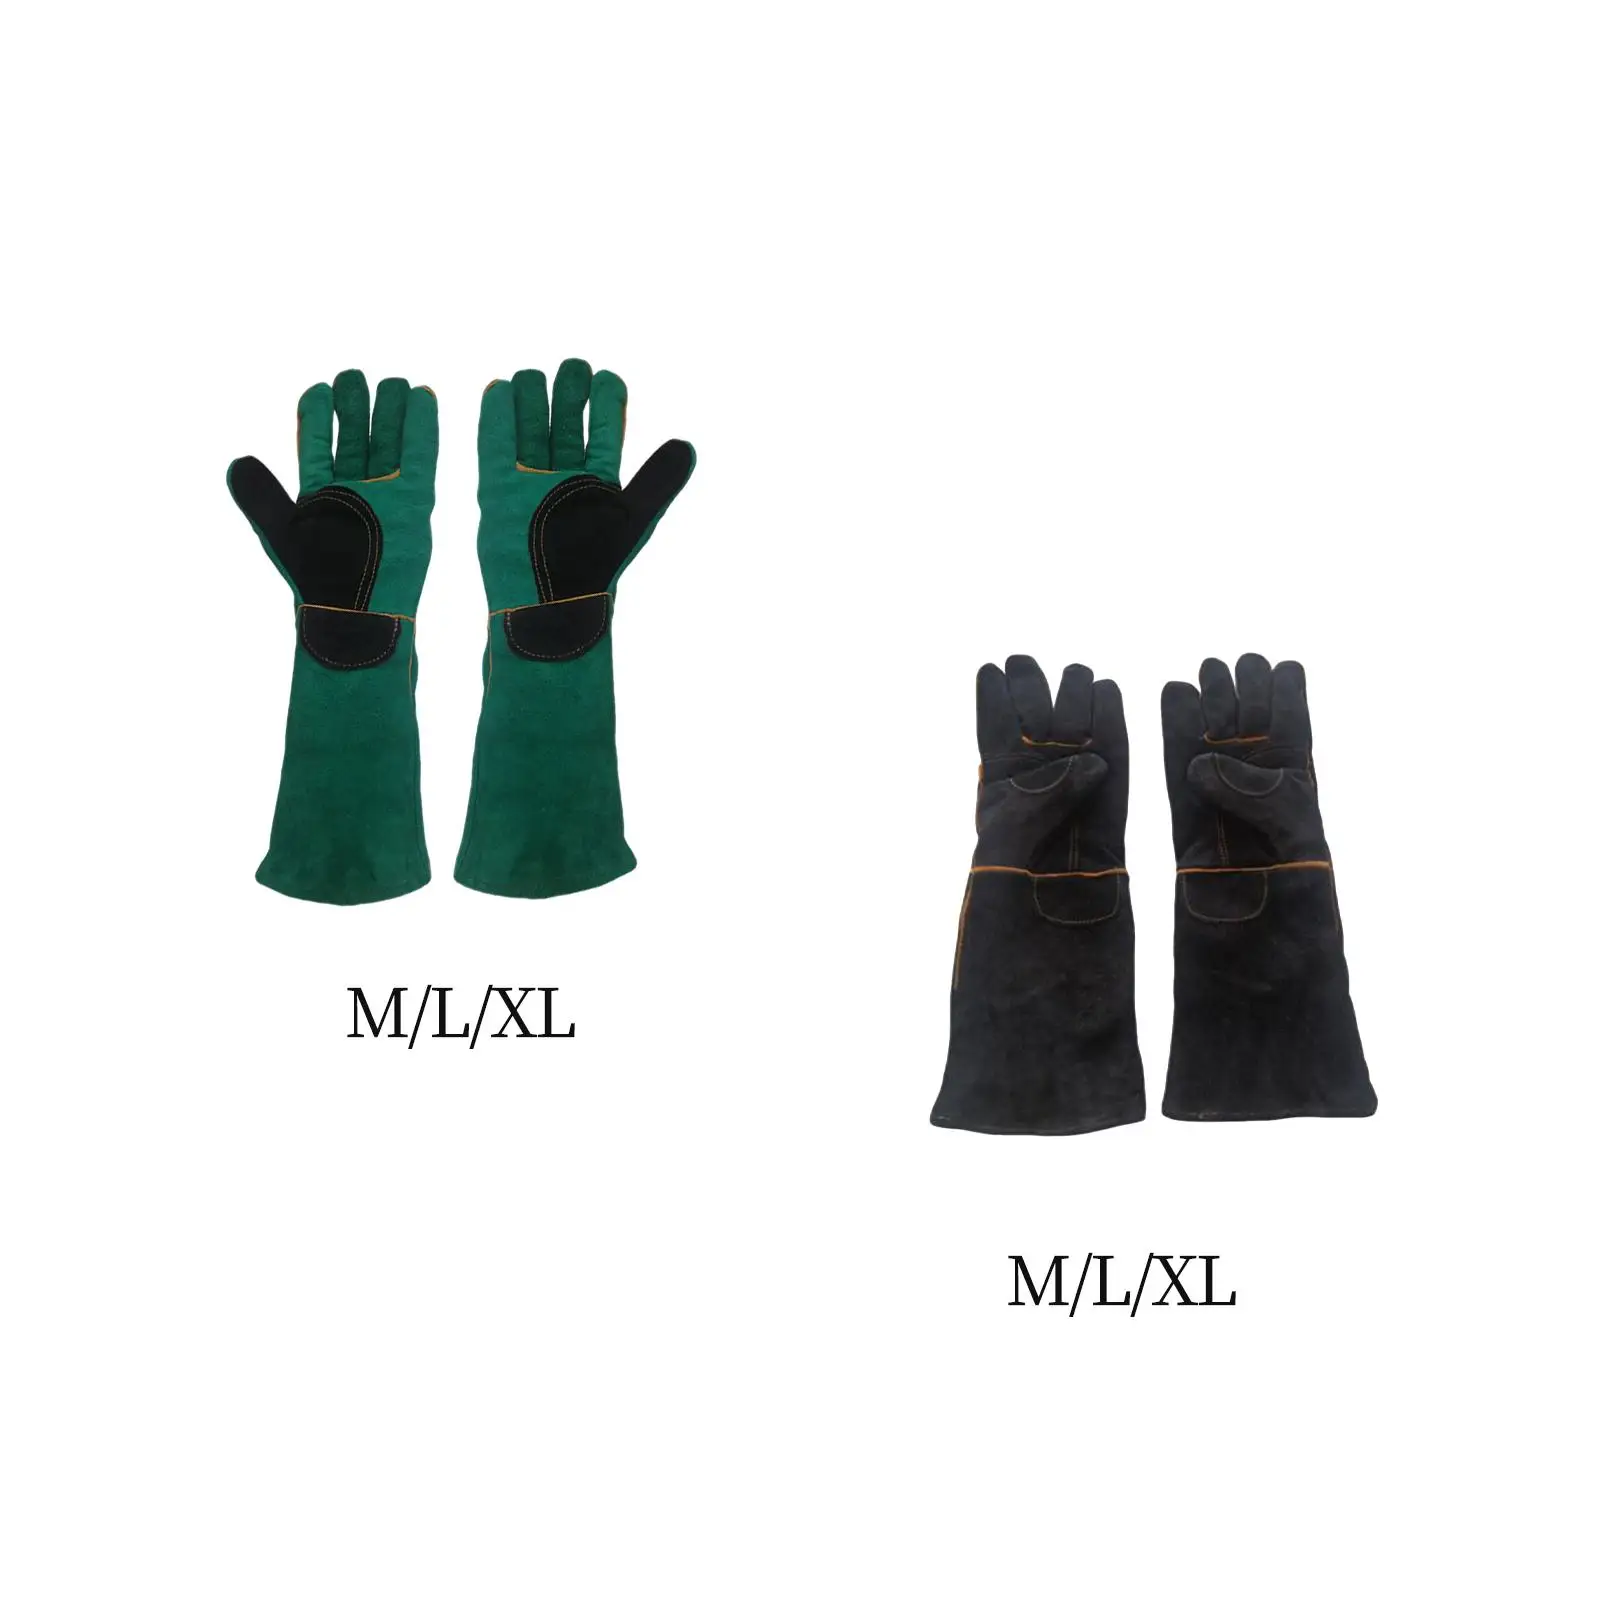 Bite Resistant Animal Handling Gloves Reinforced Leather Protective for Zoo Working Parrot